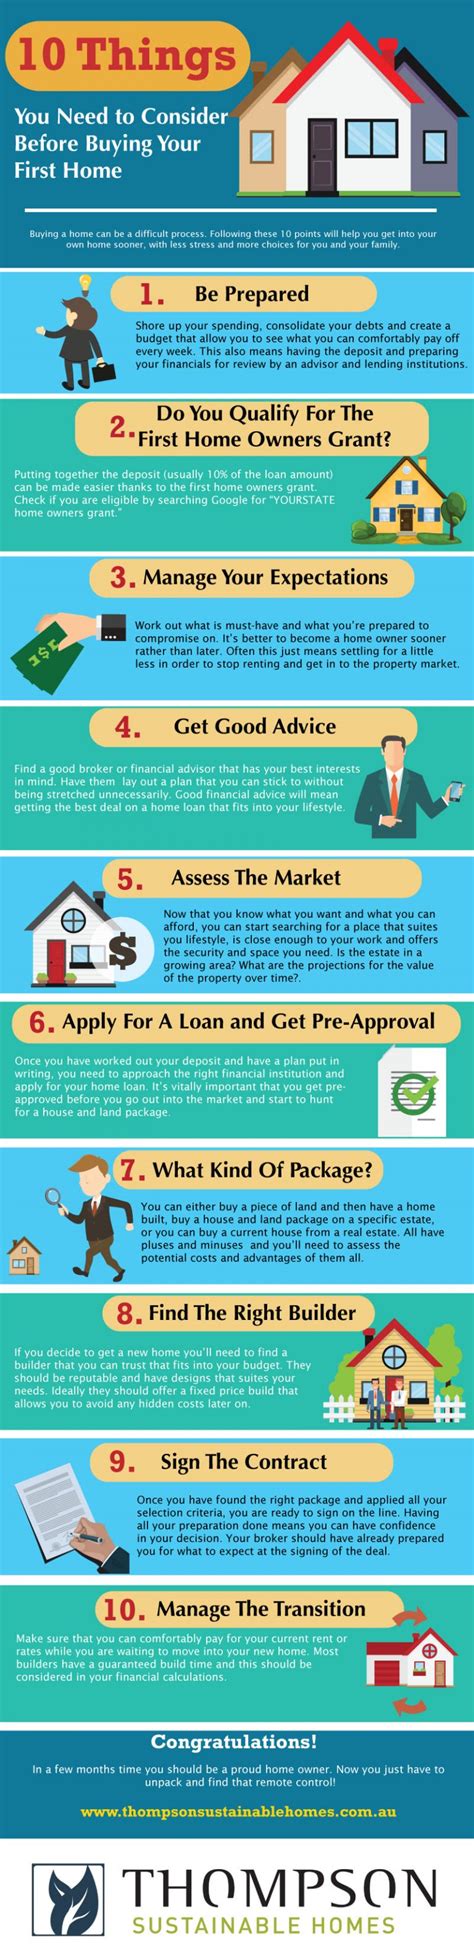 Infographic 10 Things You Need To Consider Before Buying Your First Home Thompson